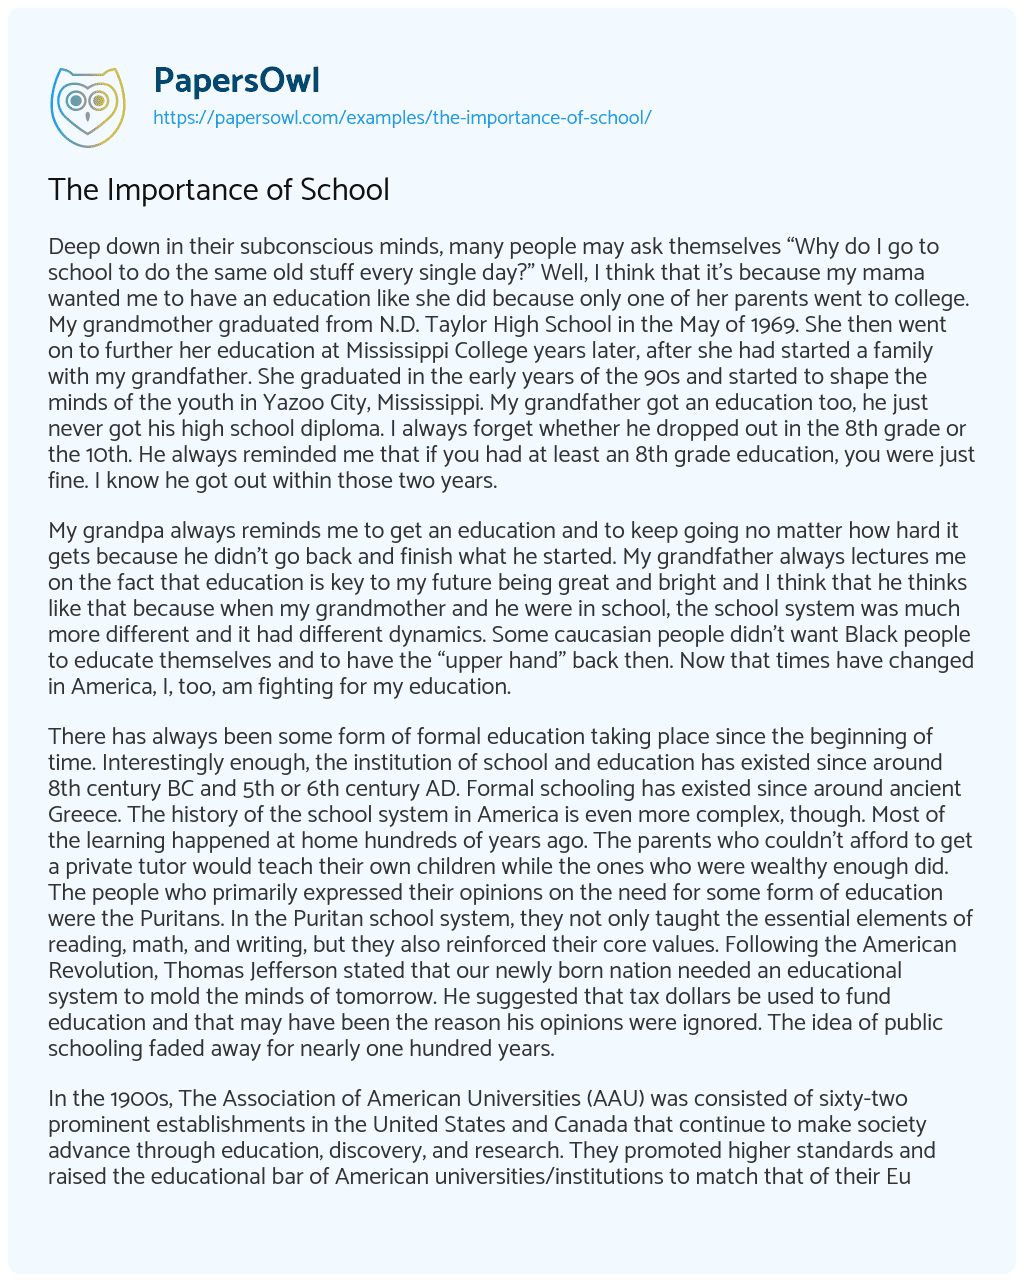 Essay on The Importance of School